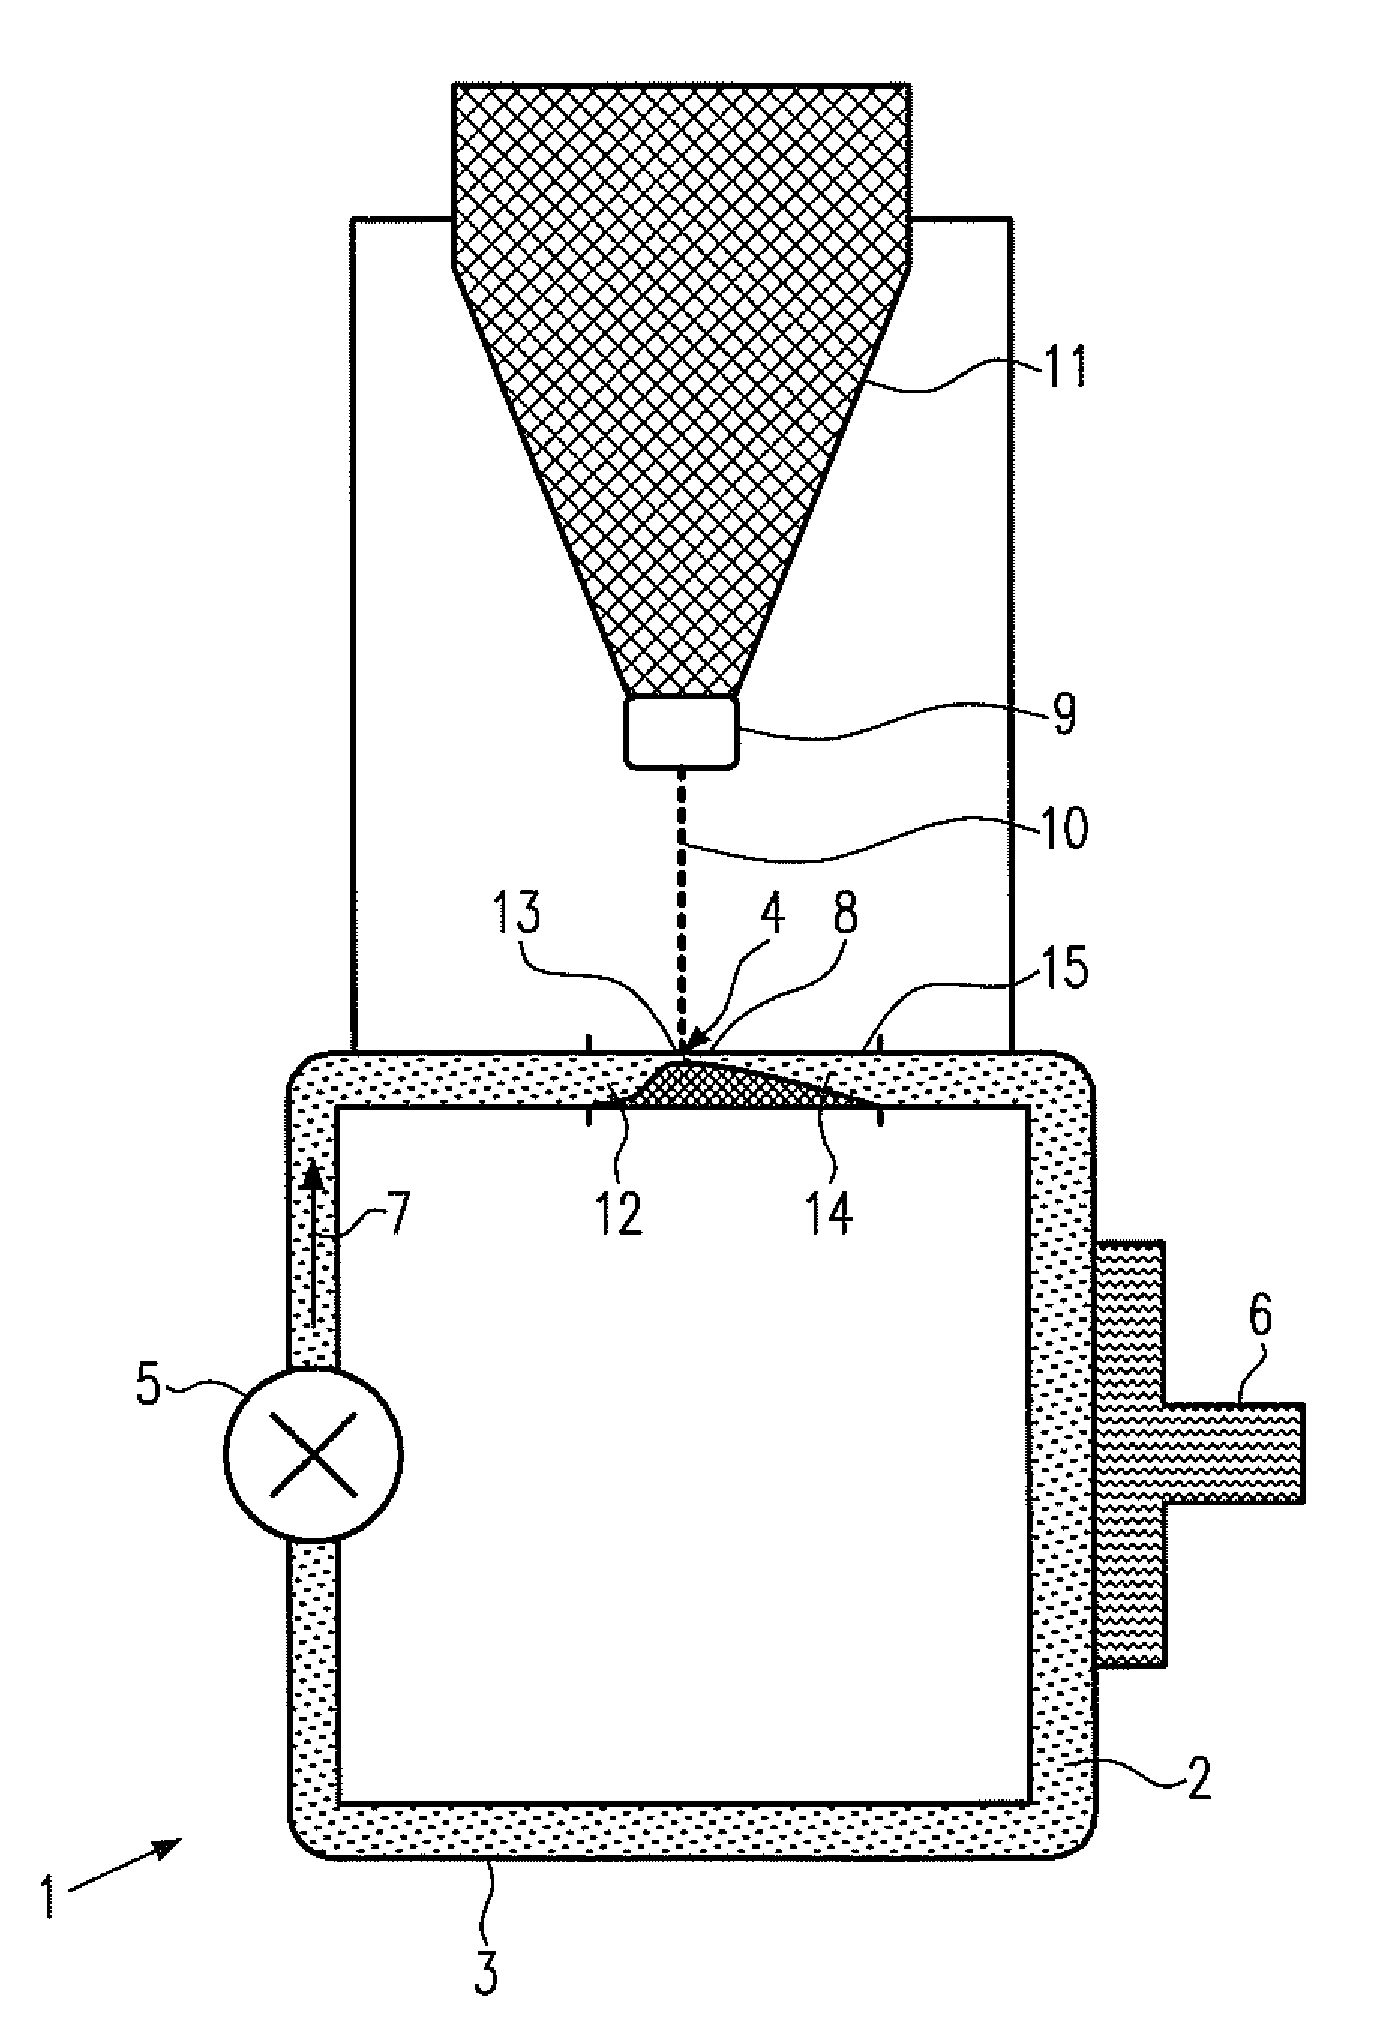 X-ray emitter, liquid-metal anode for an x-ray source and method for operating a magnetohydrodynamic pump for the same